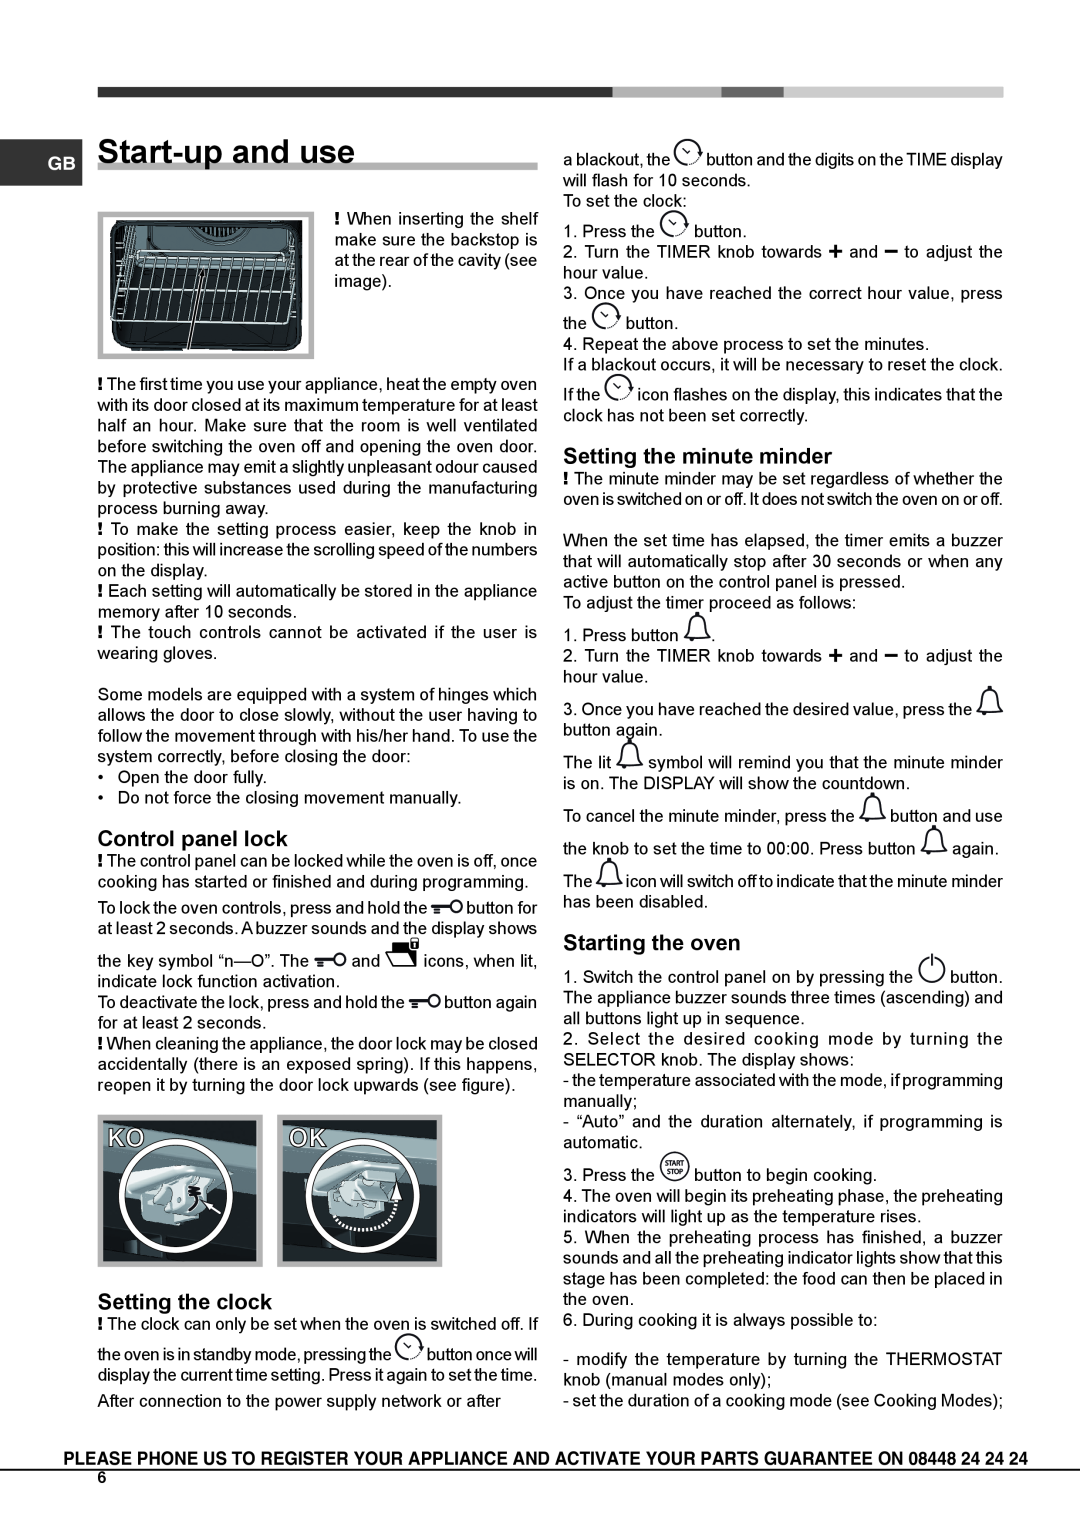 Hotpoint SX 896 PX S manual GB Start-up and use, Control panel lock, Setting the clock, Setting the minute minder 